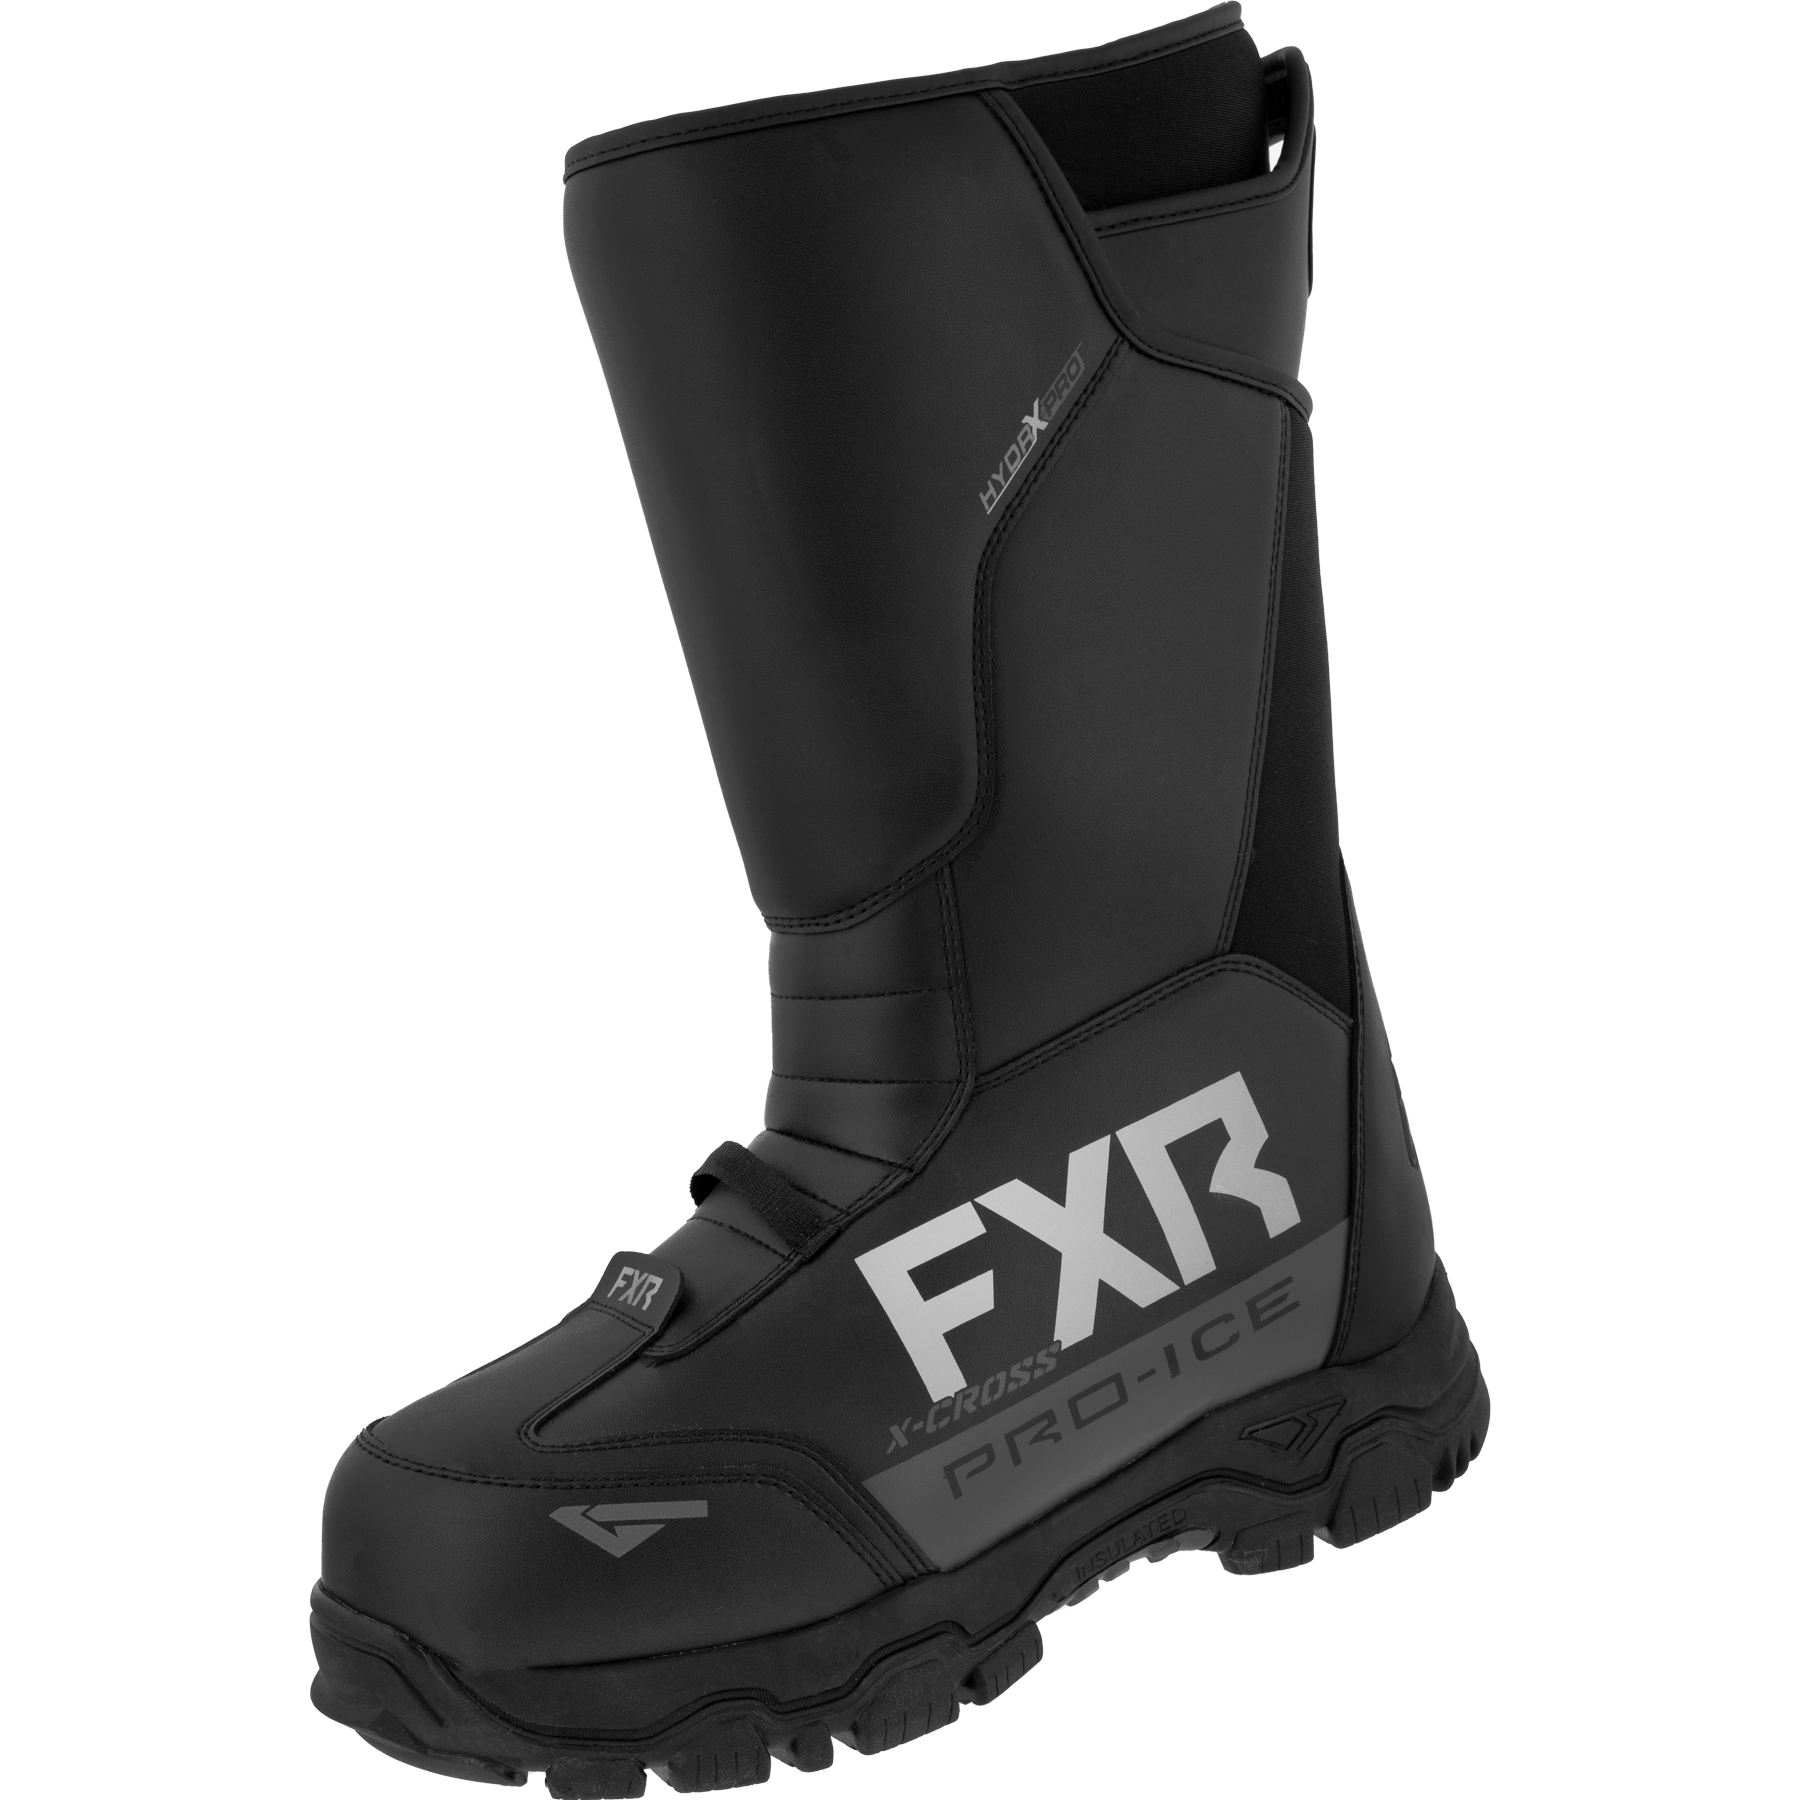 fxr racing lace boots adult x cross pro ice